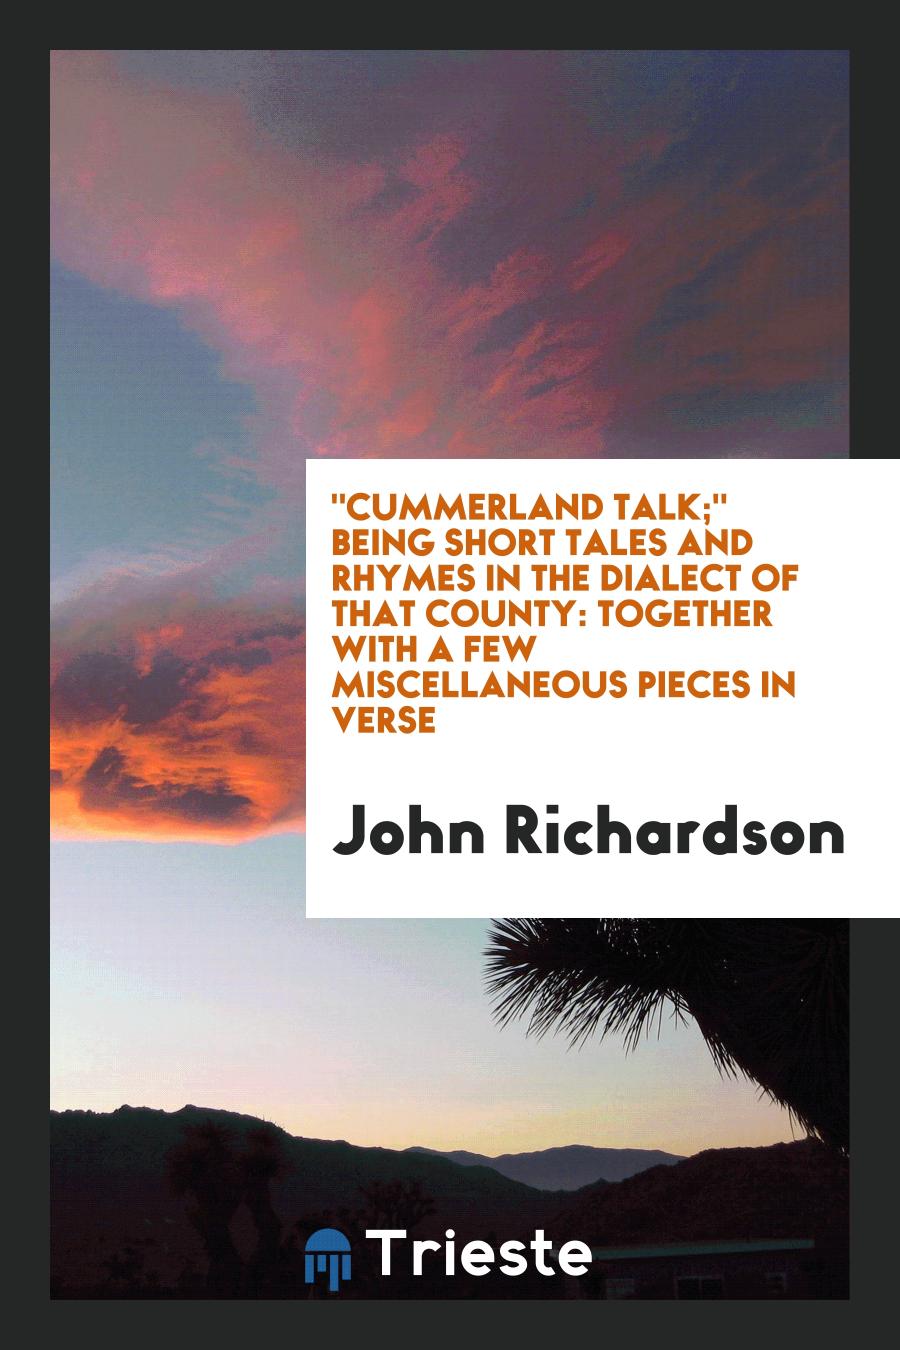 "Cummerland talk;" being short tales and rhymes in the dialect of that county: together with a few miscellaneous pieces in verse